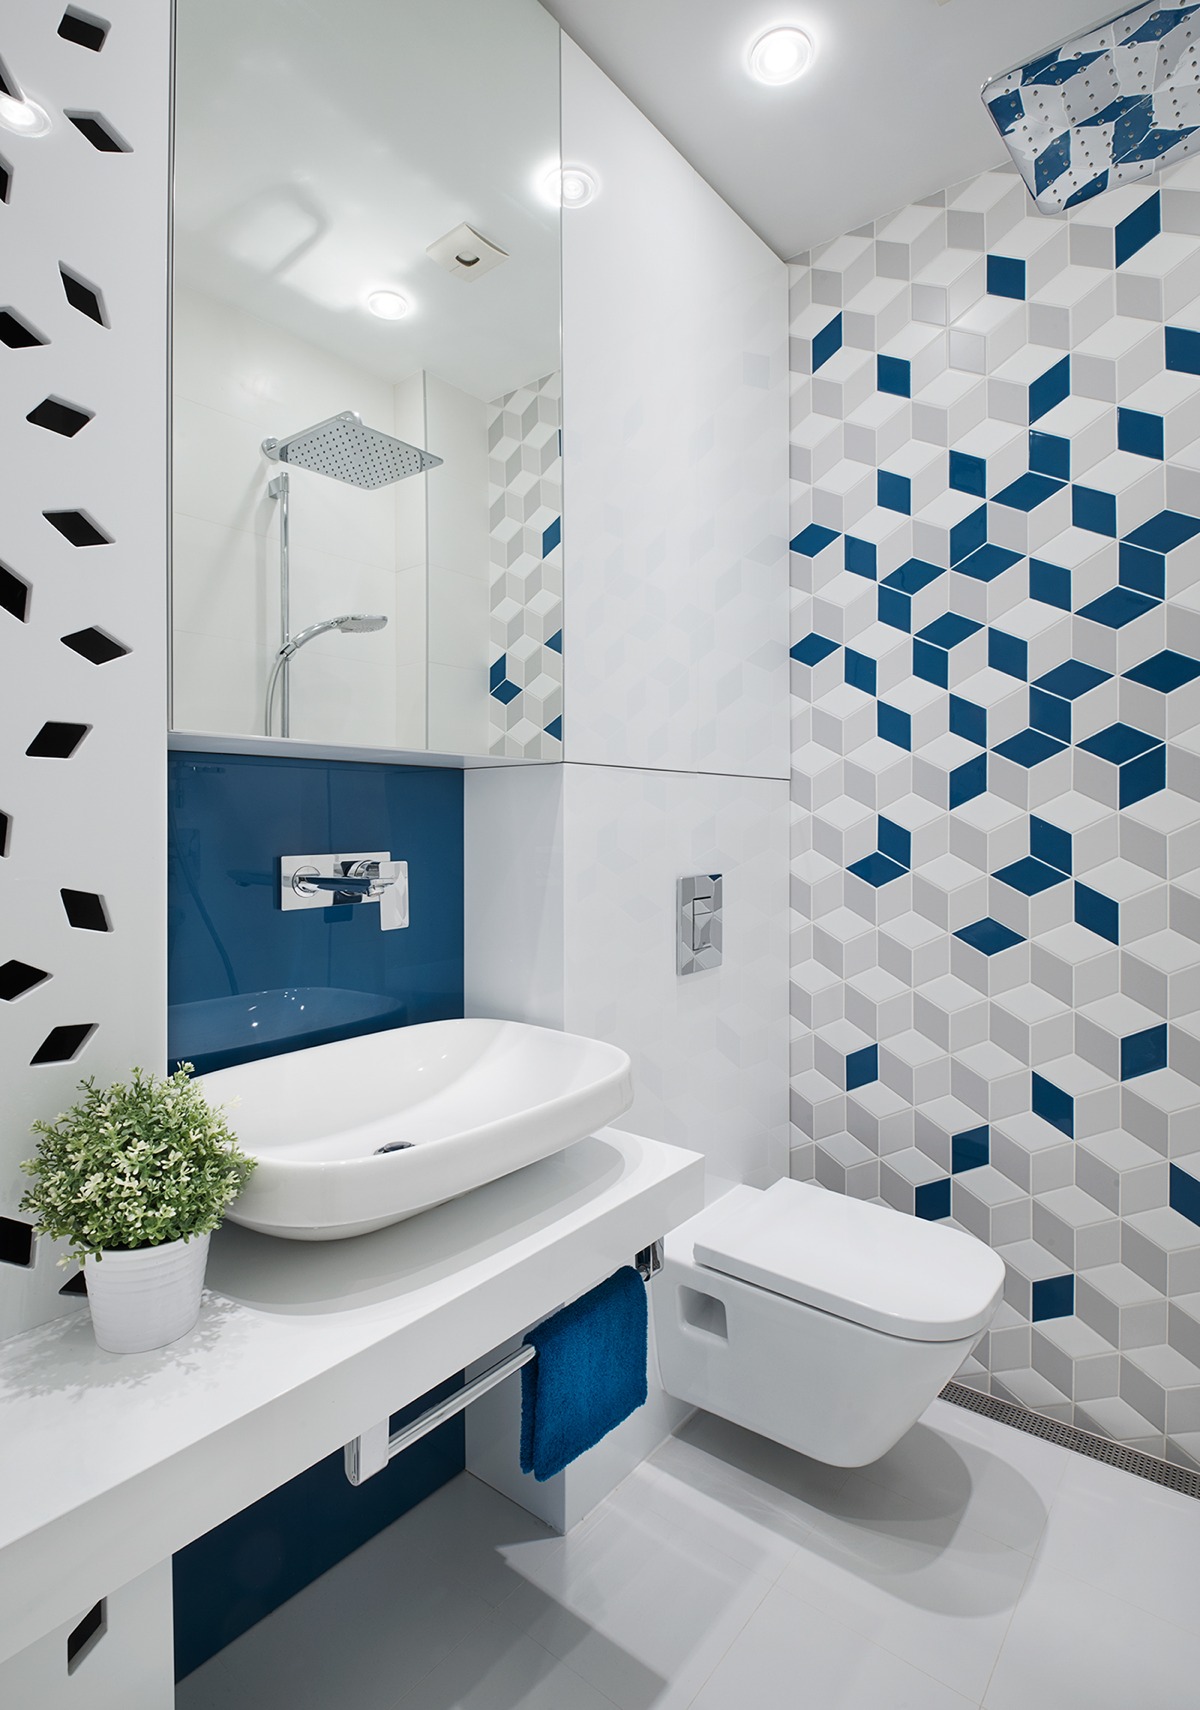 Home Design Ideas- The Trendiest WashroomTiles for You This Year